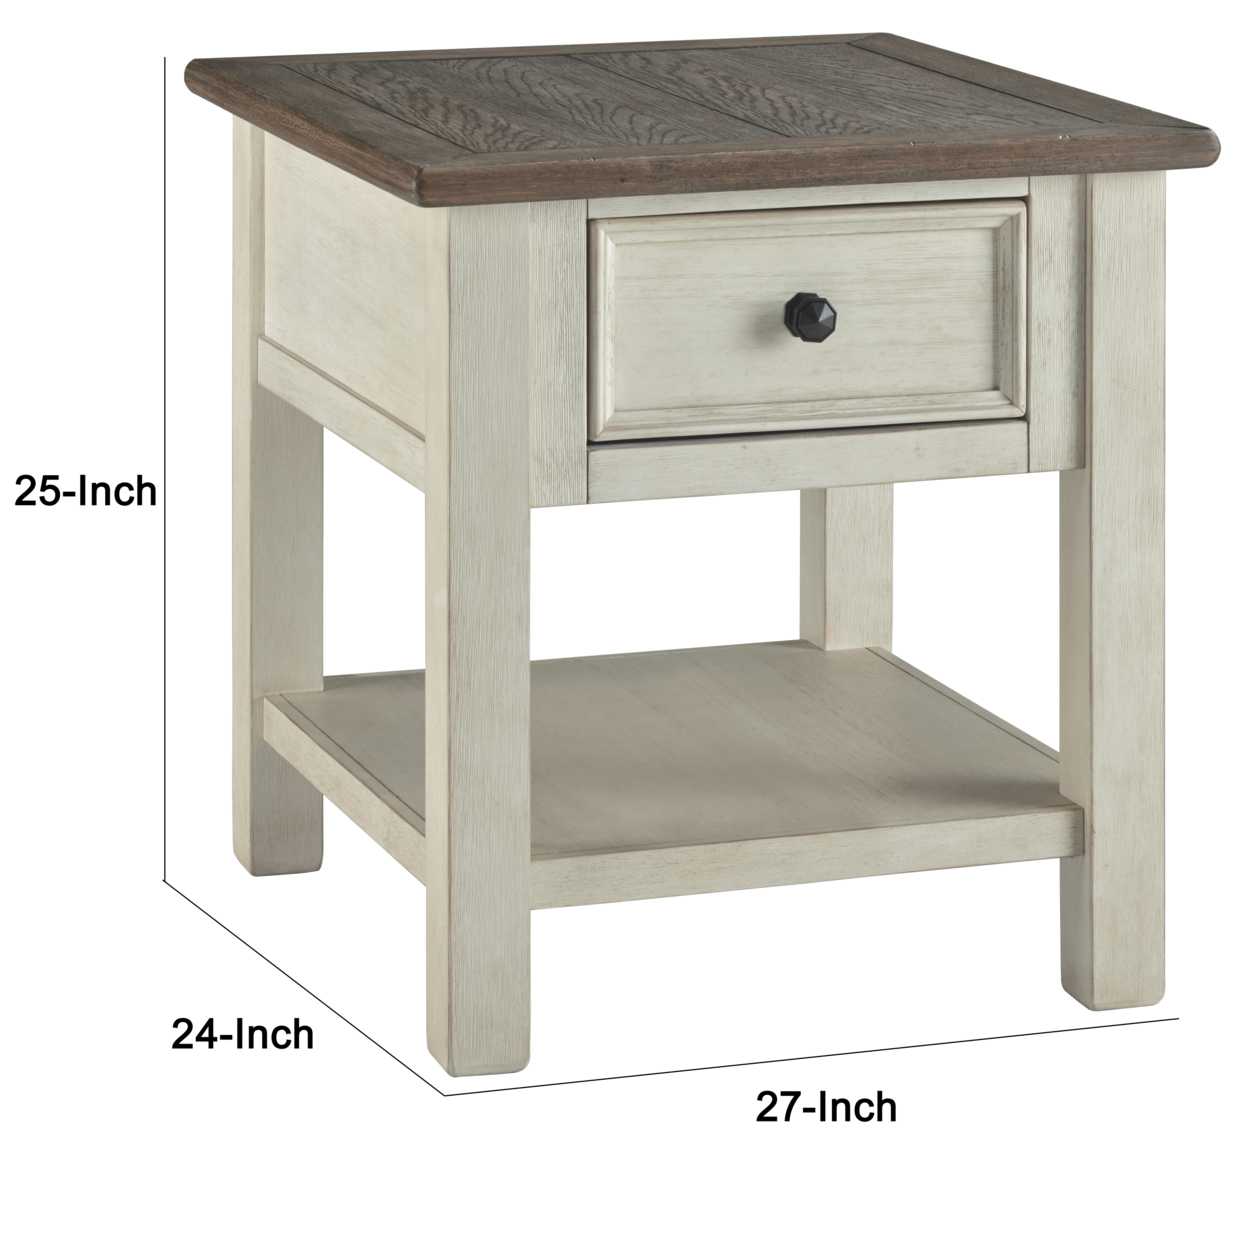 End Table With Plank Top And A Gliding Drawer, Cream And Brown- Saltoro Sherpi